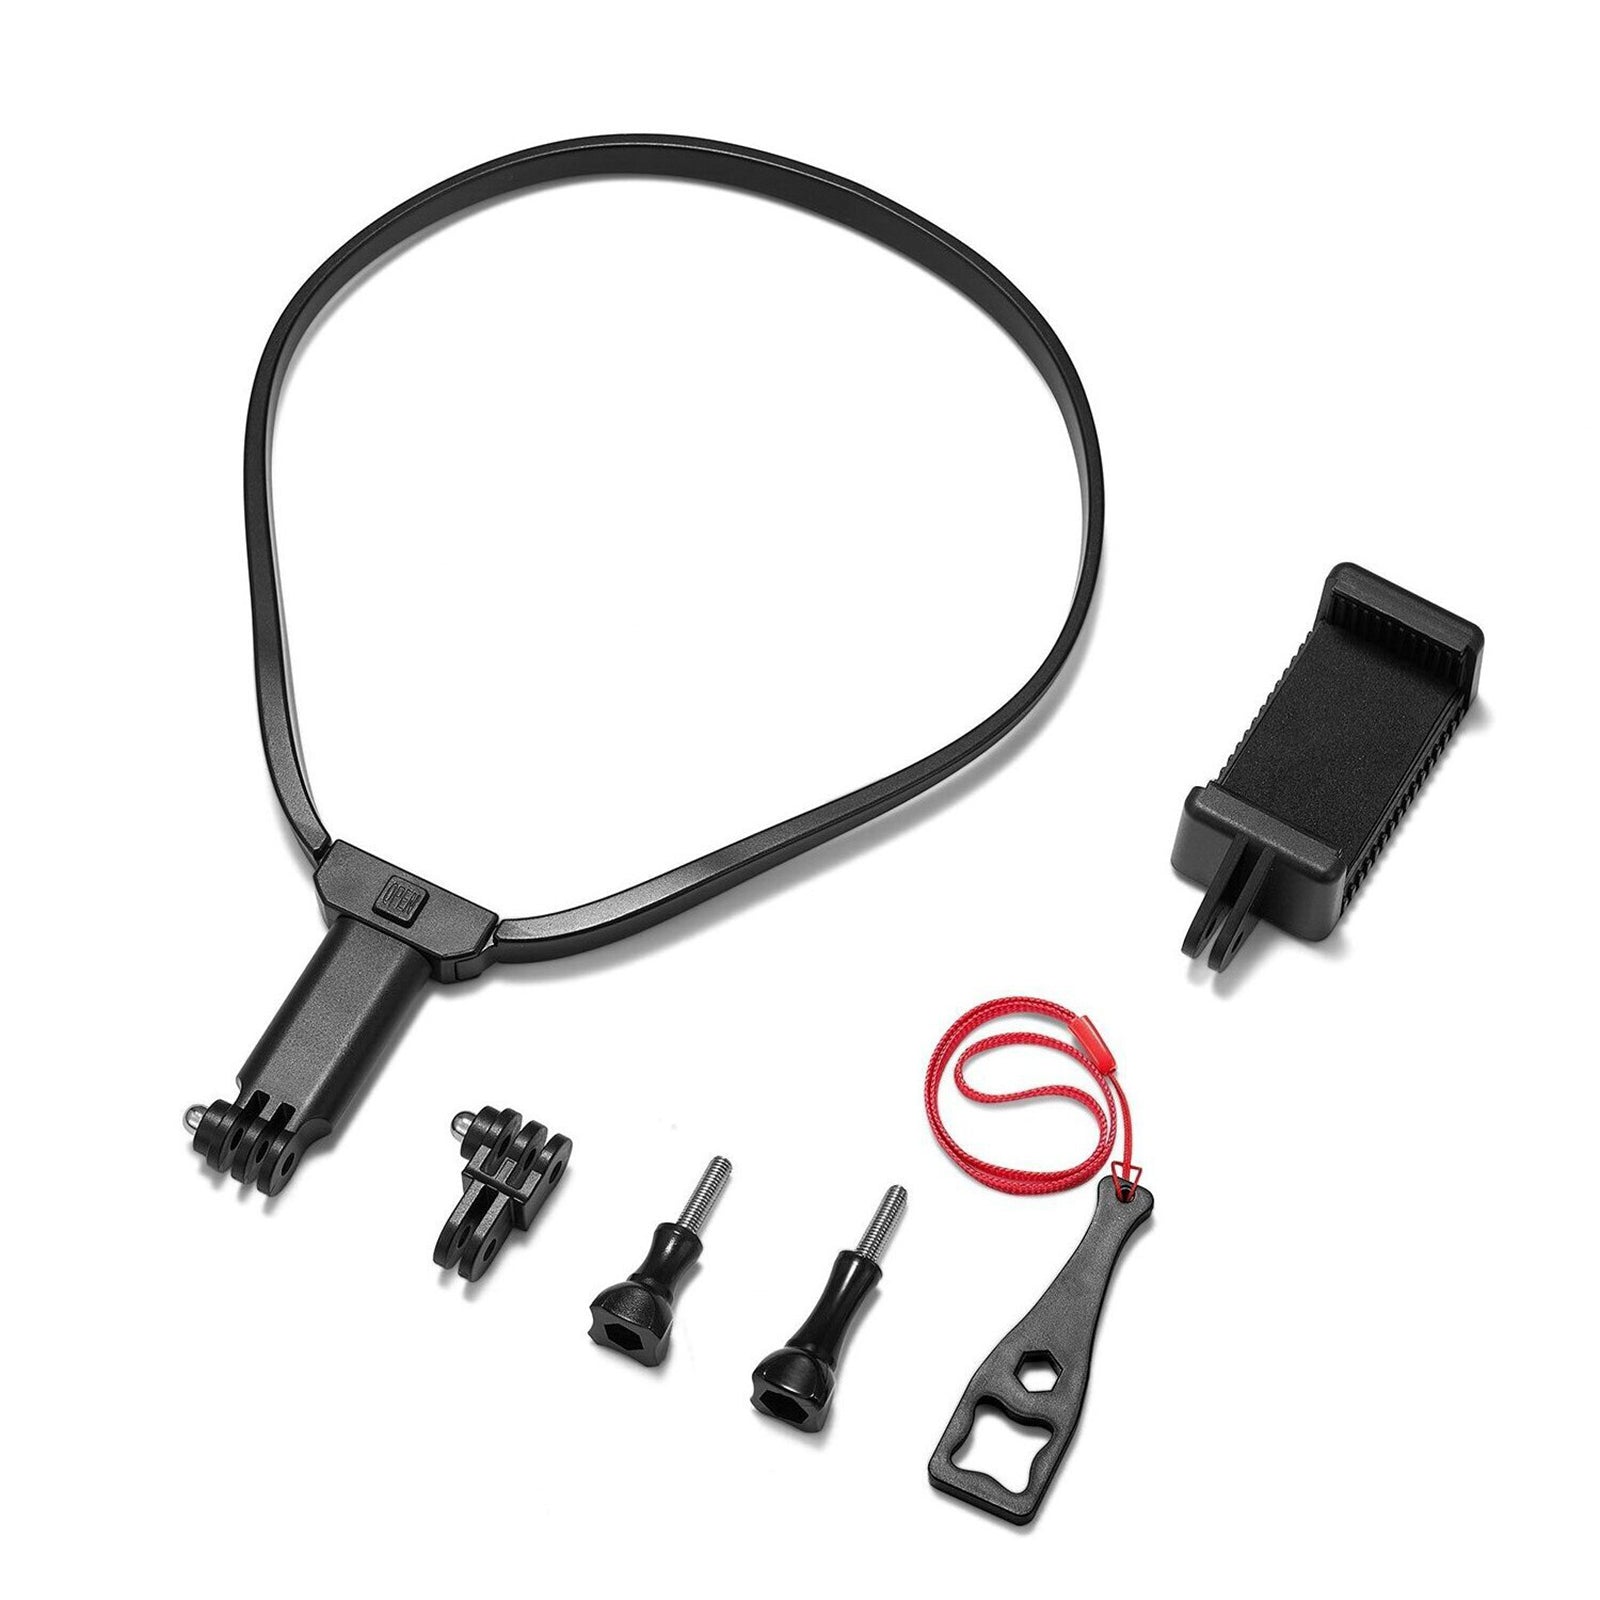 POV/Vlog Neck Holder Mount Head Strap for GoPro Comfortable with adapter